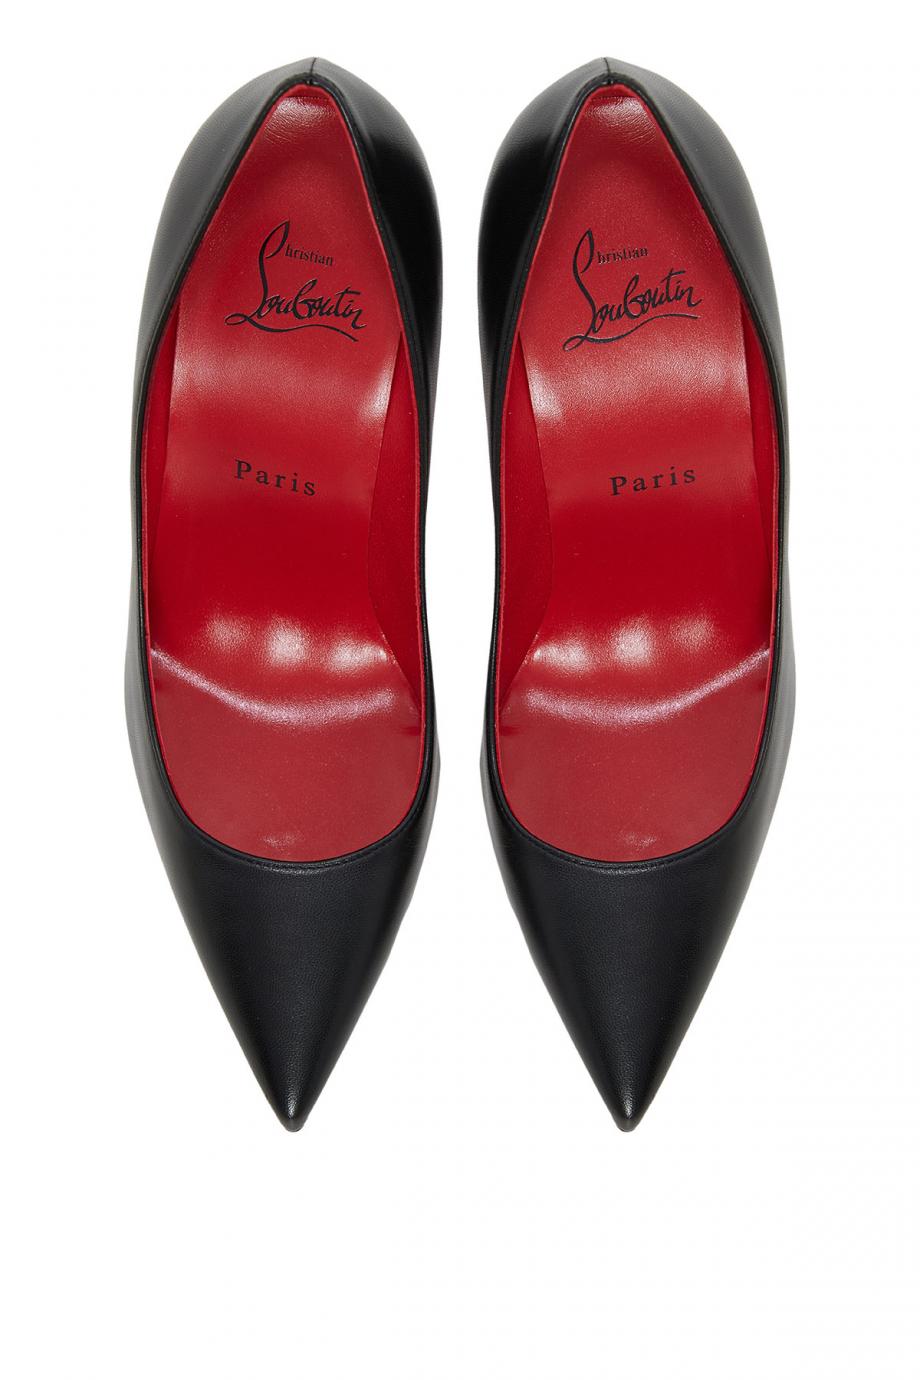 Kate leather 100mm pumps 